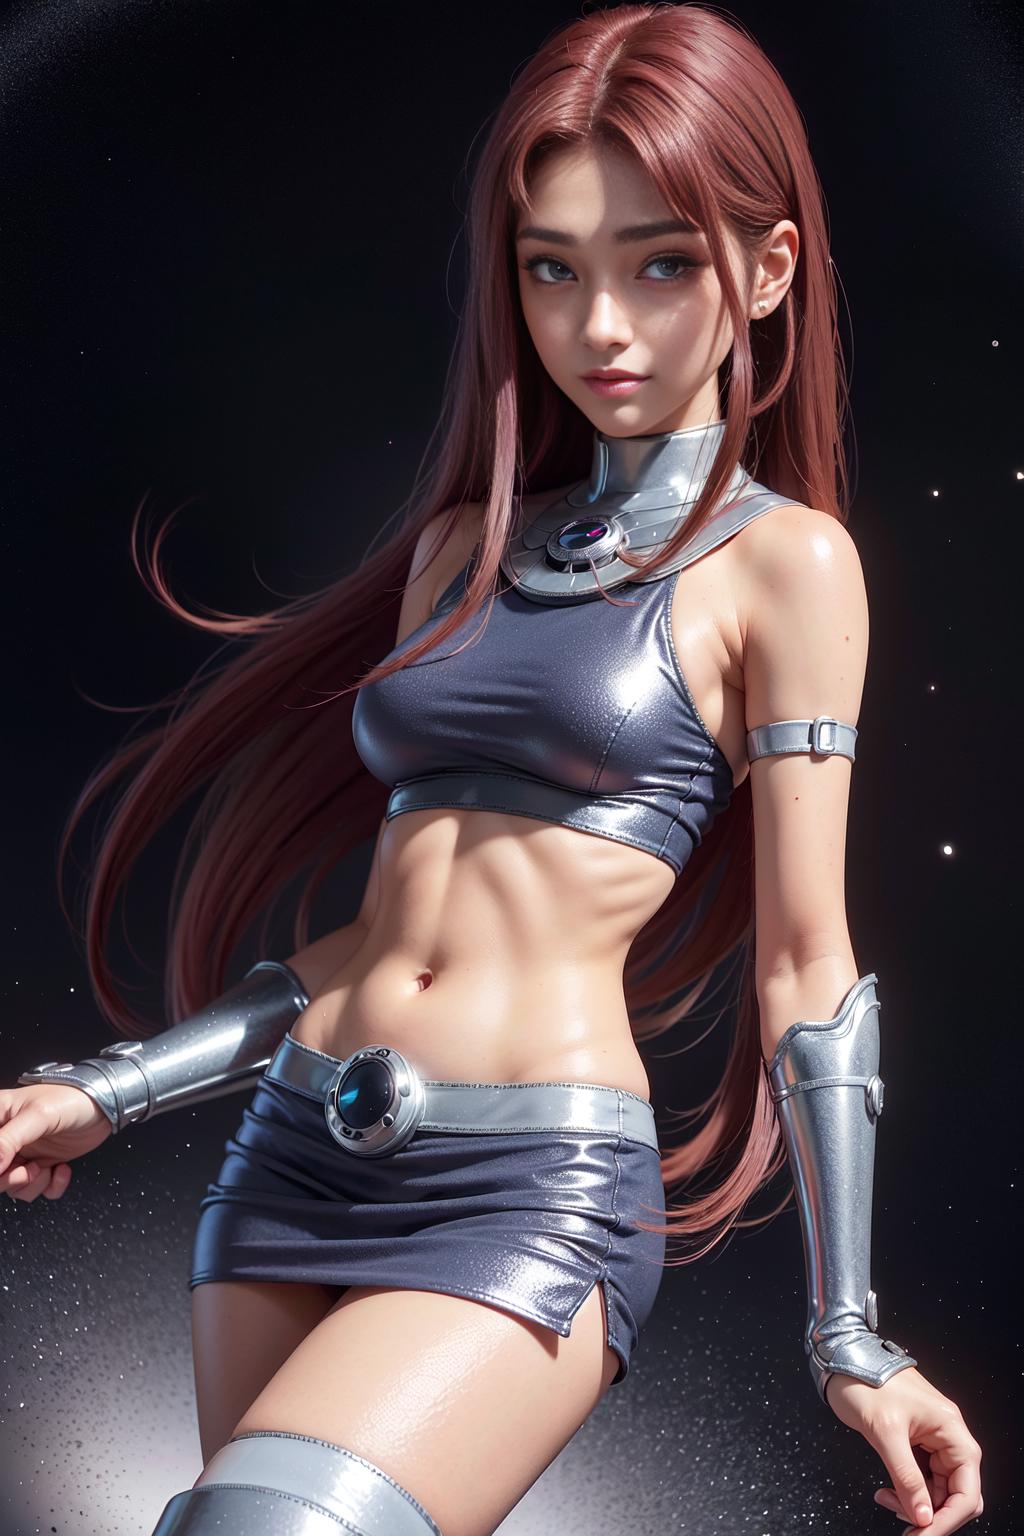 Adult Starfire (Teen titans) image by 12user34kn276